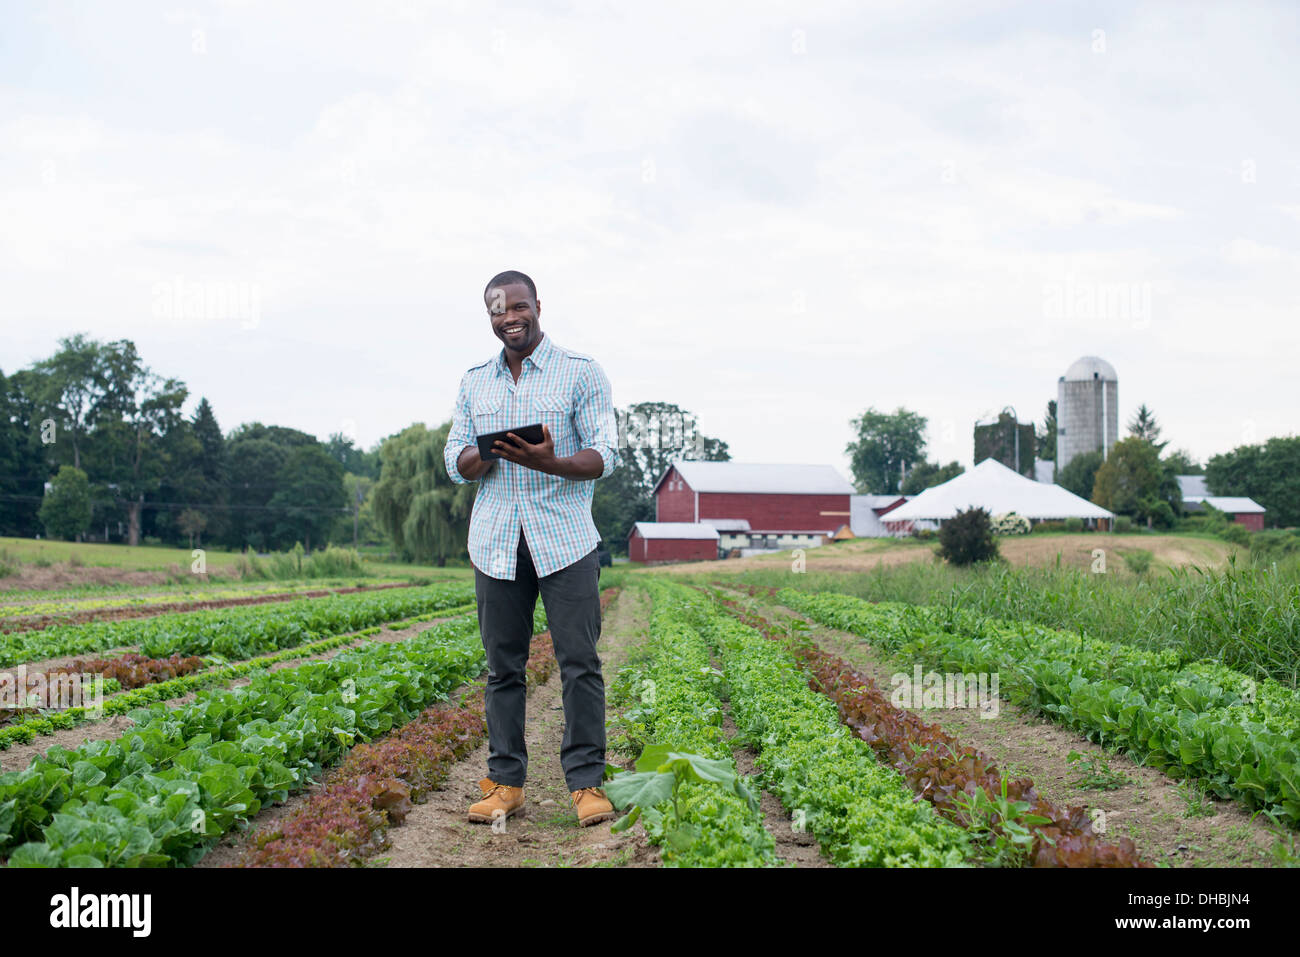 An organic farm growing vegetables. A man in the fields inspecting the lettuce crop, using a digital tablet. Stock Photo